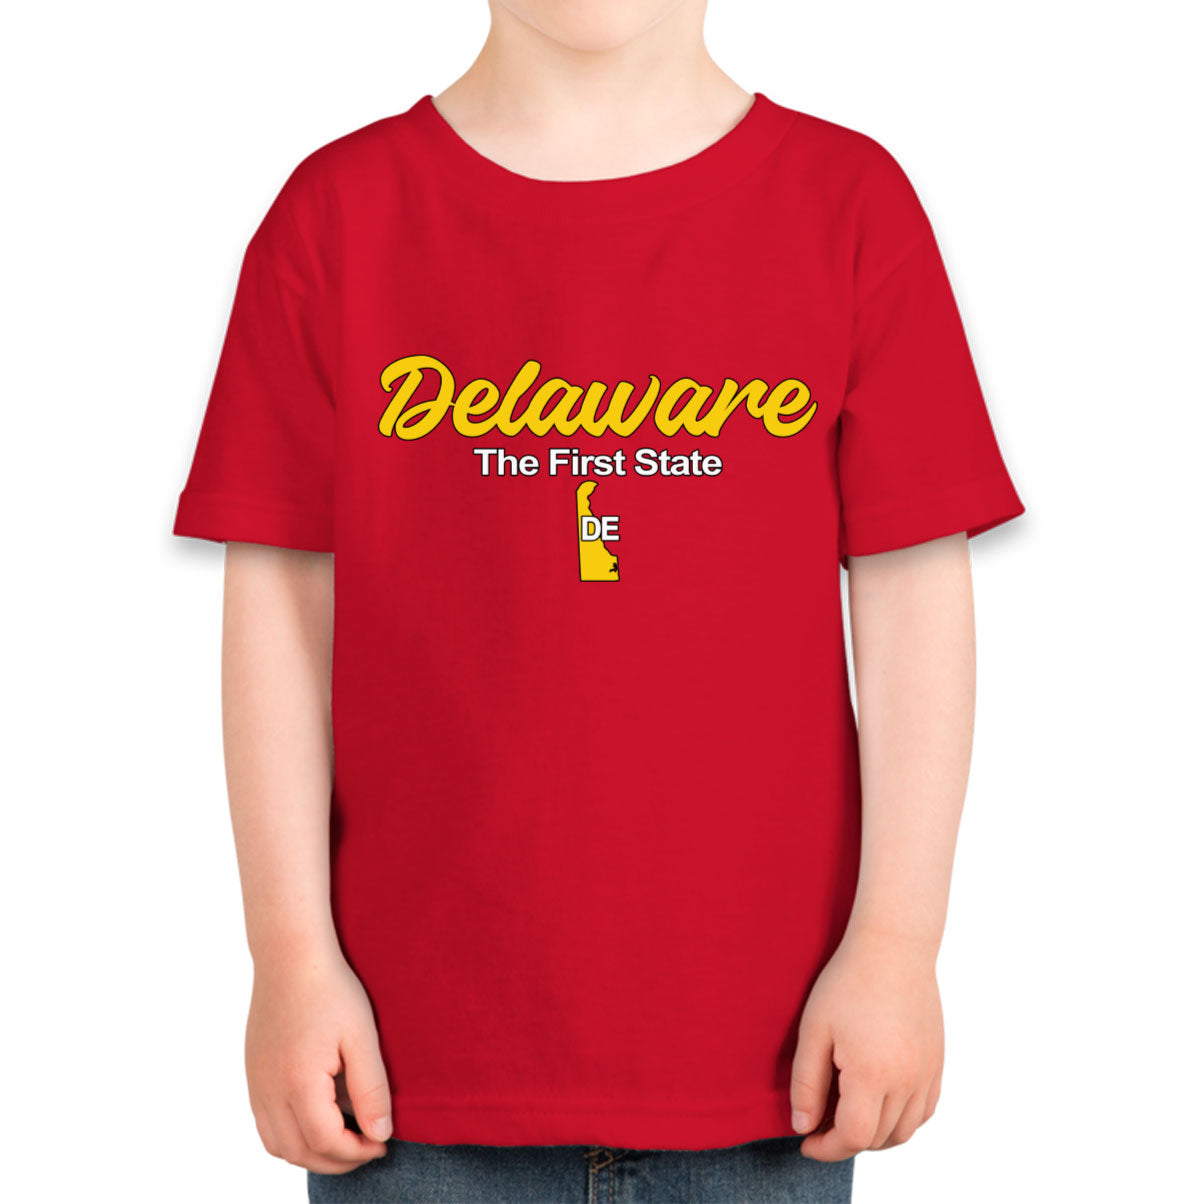 Delaware The First State Toddler T-shirt